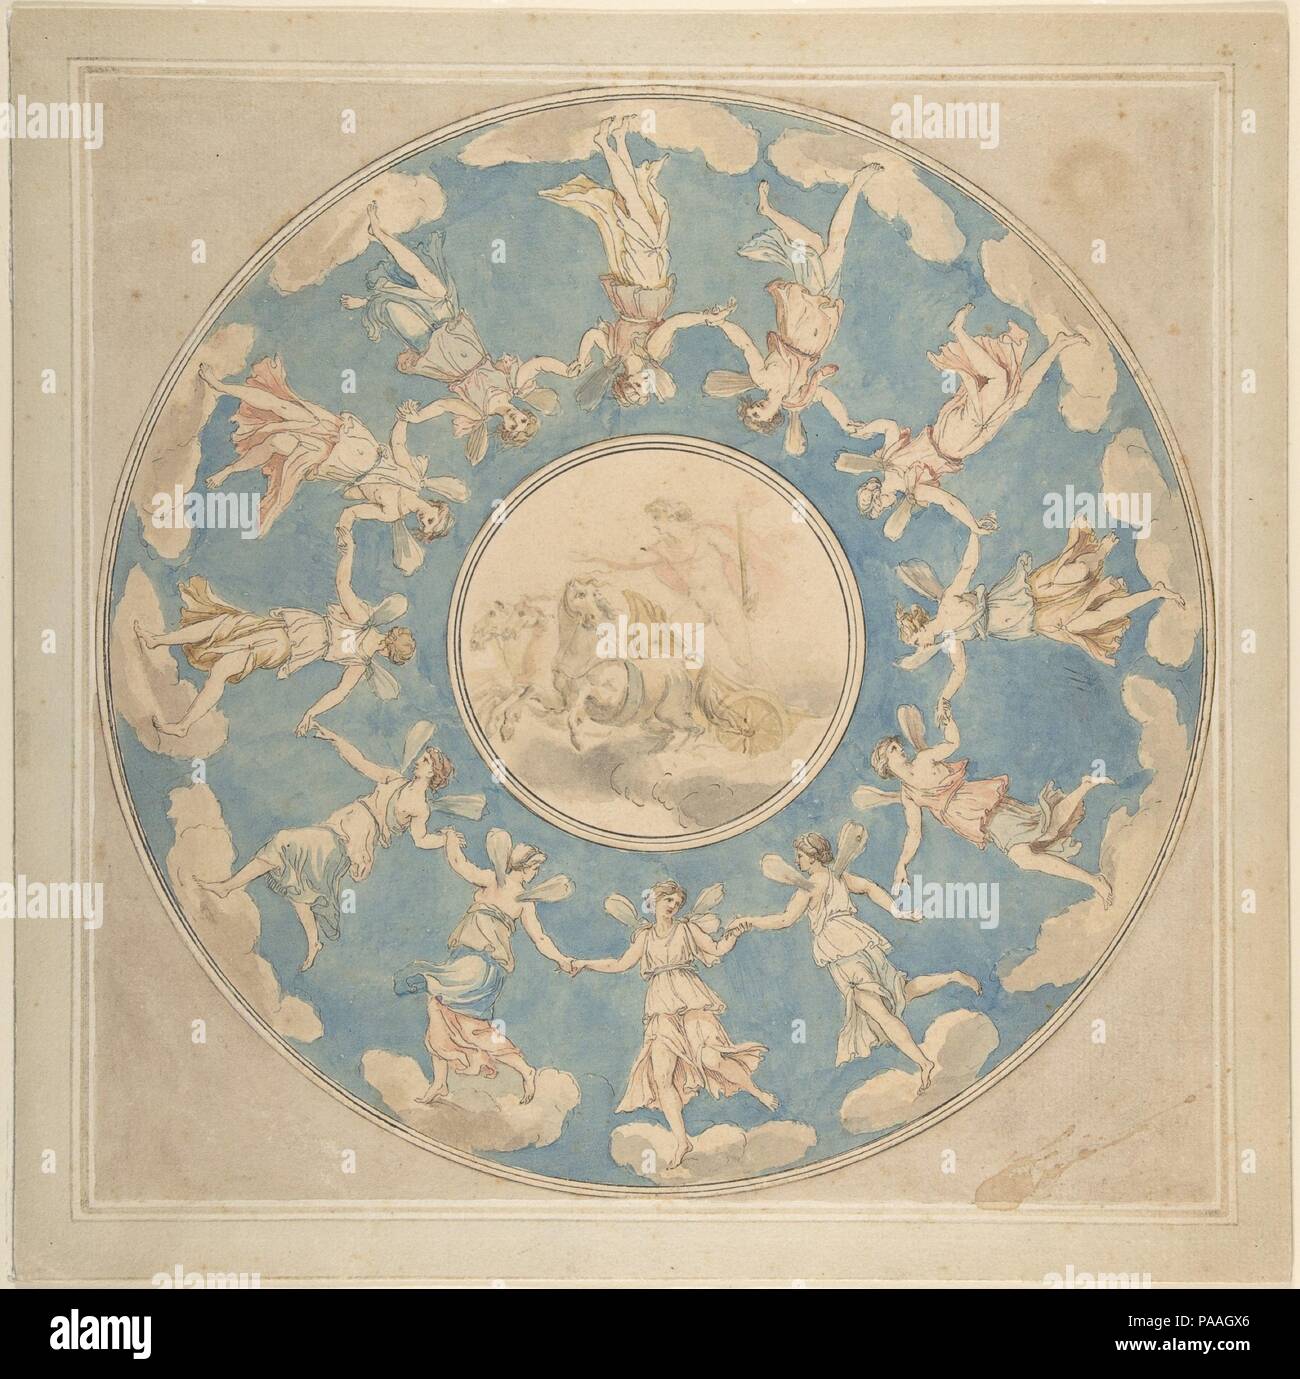 Design for Ceiling: Apollo and the Hours. Artist: Angelica Kauffmann (Swiss, Chur 1741-1807 Rome). Dimensions: Image (diameter): 11 5/16 in. (28.8cm)  Sheet: 12 7/8 x 12 15/16 in (32.7 x 32.8 cm). Former Attribution: Formerly attributed to Giovanni Battista Cipriani (Italian, Florence 1727-1785 Hammersmith (active London)). Date: 1760-1807. Museum: Metropolitan Museum of Art, New York, USA. Stock Photo